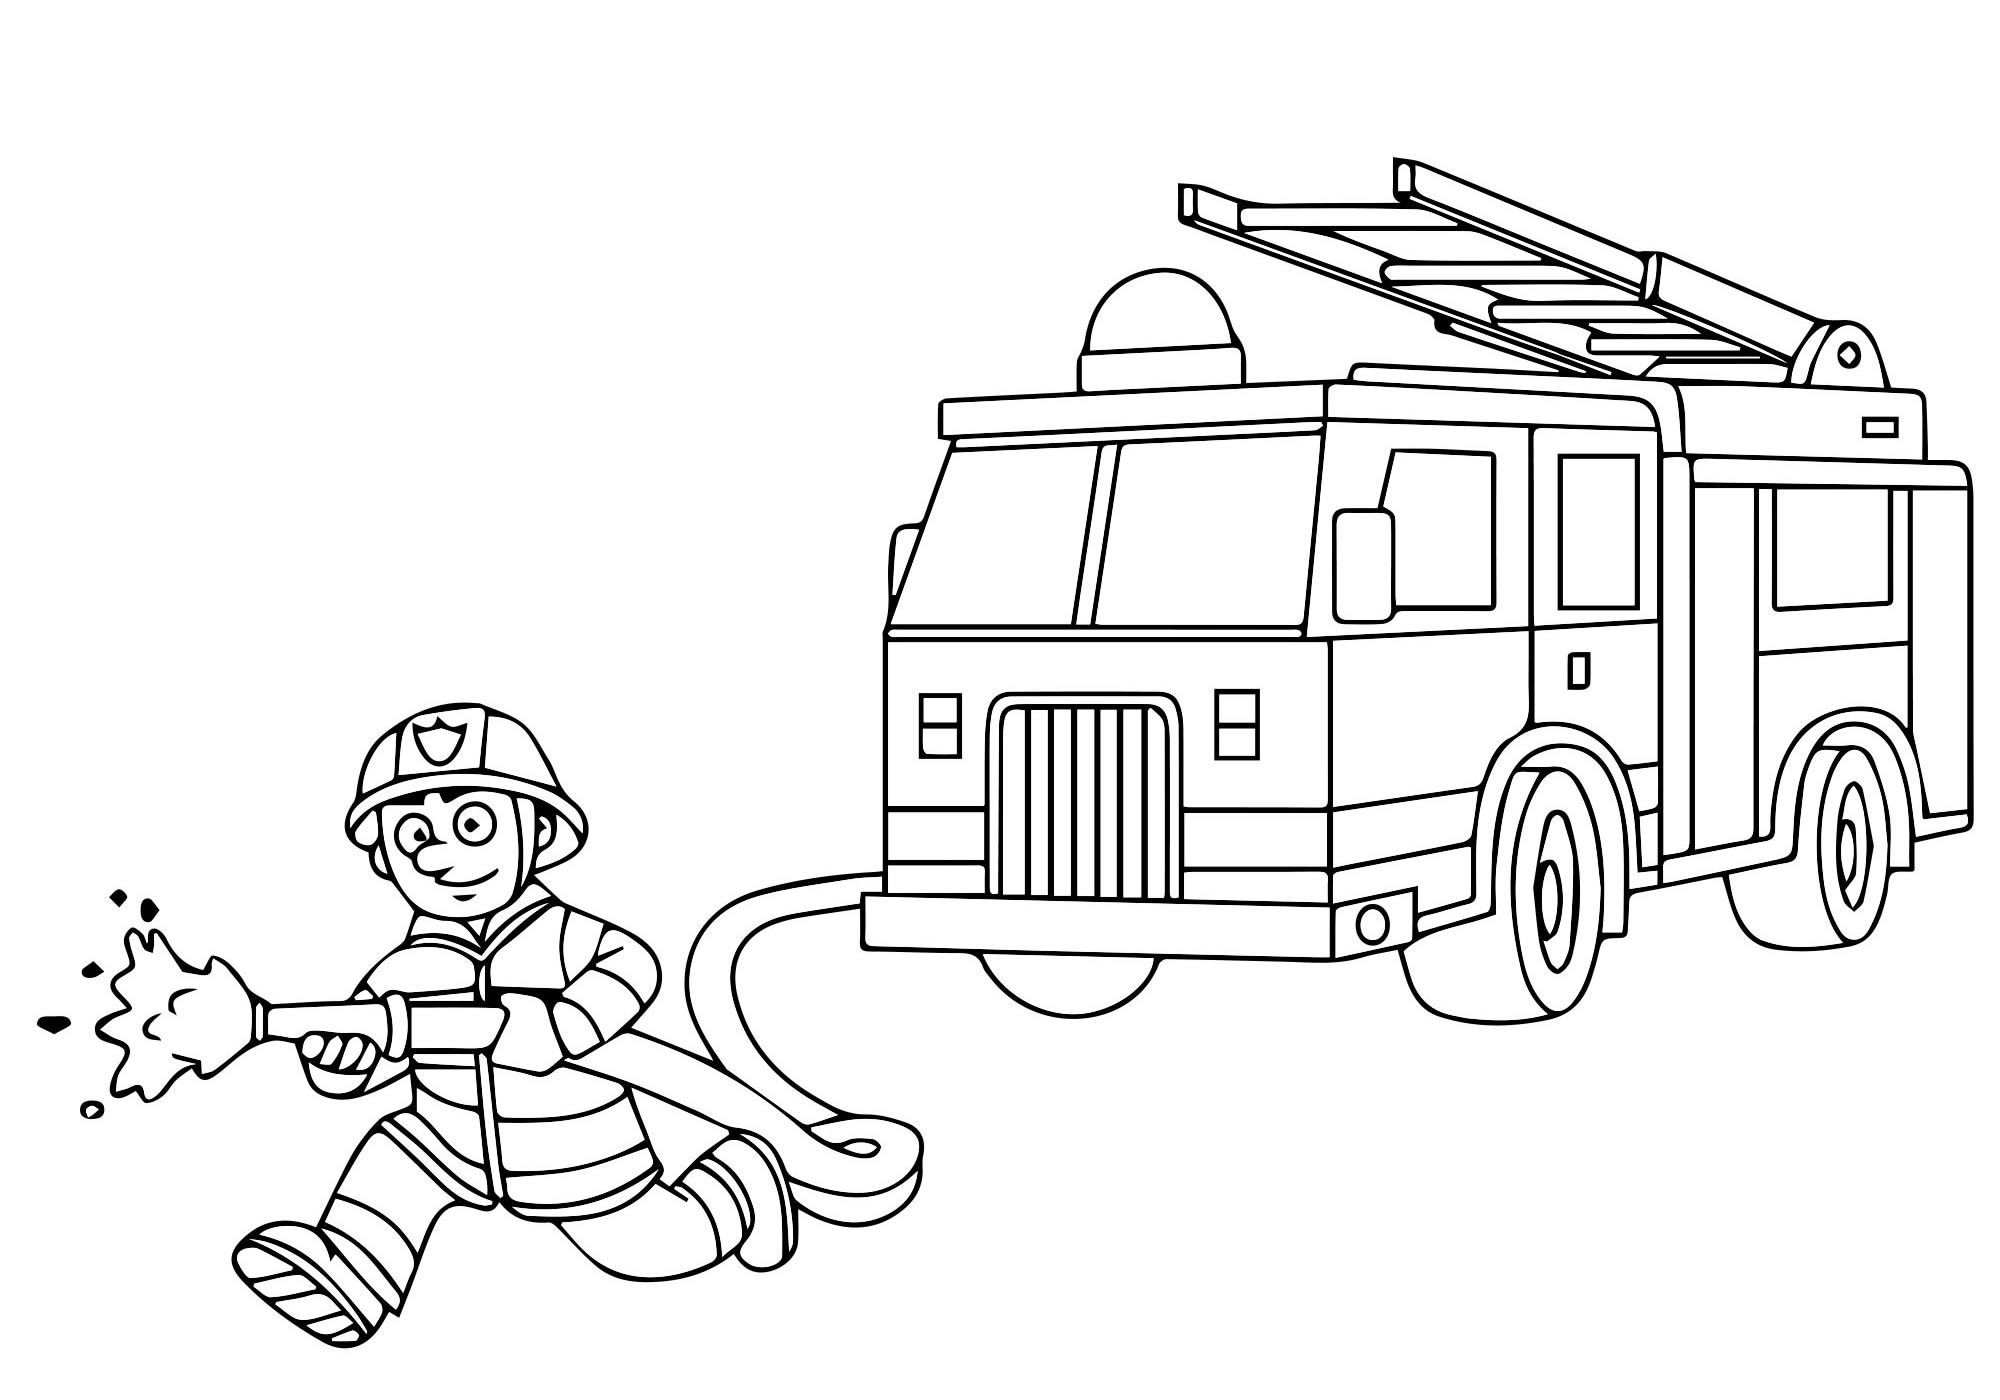 Adorable fire truck coloring page for toddlers